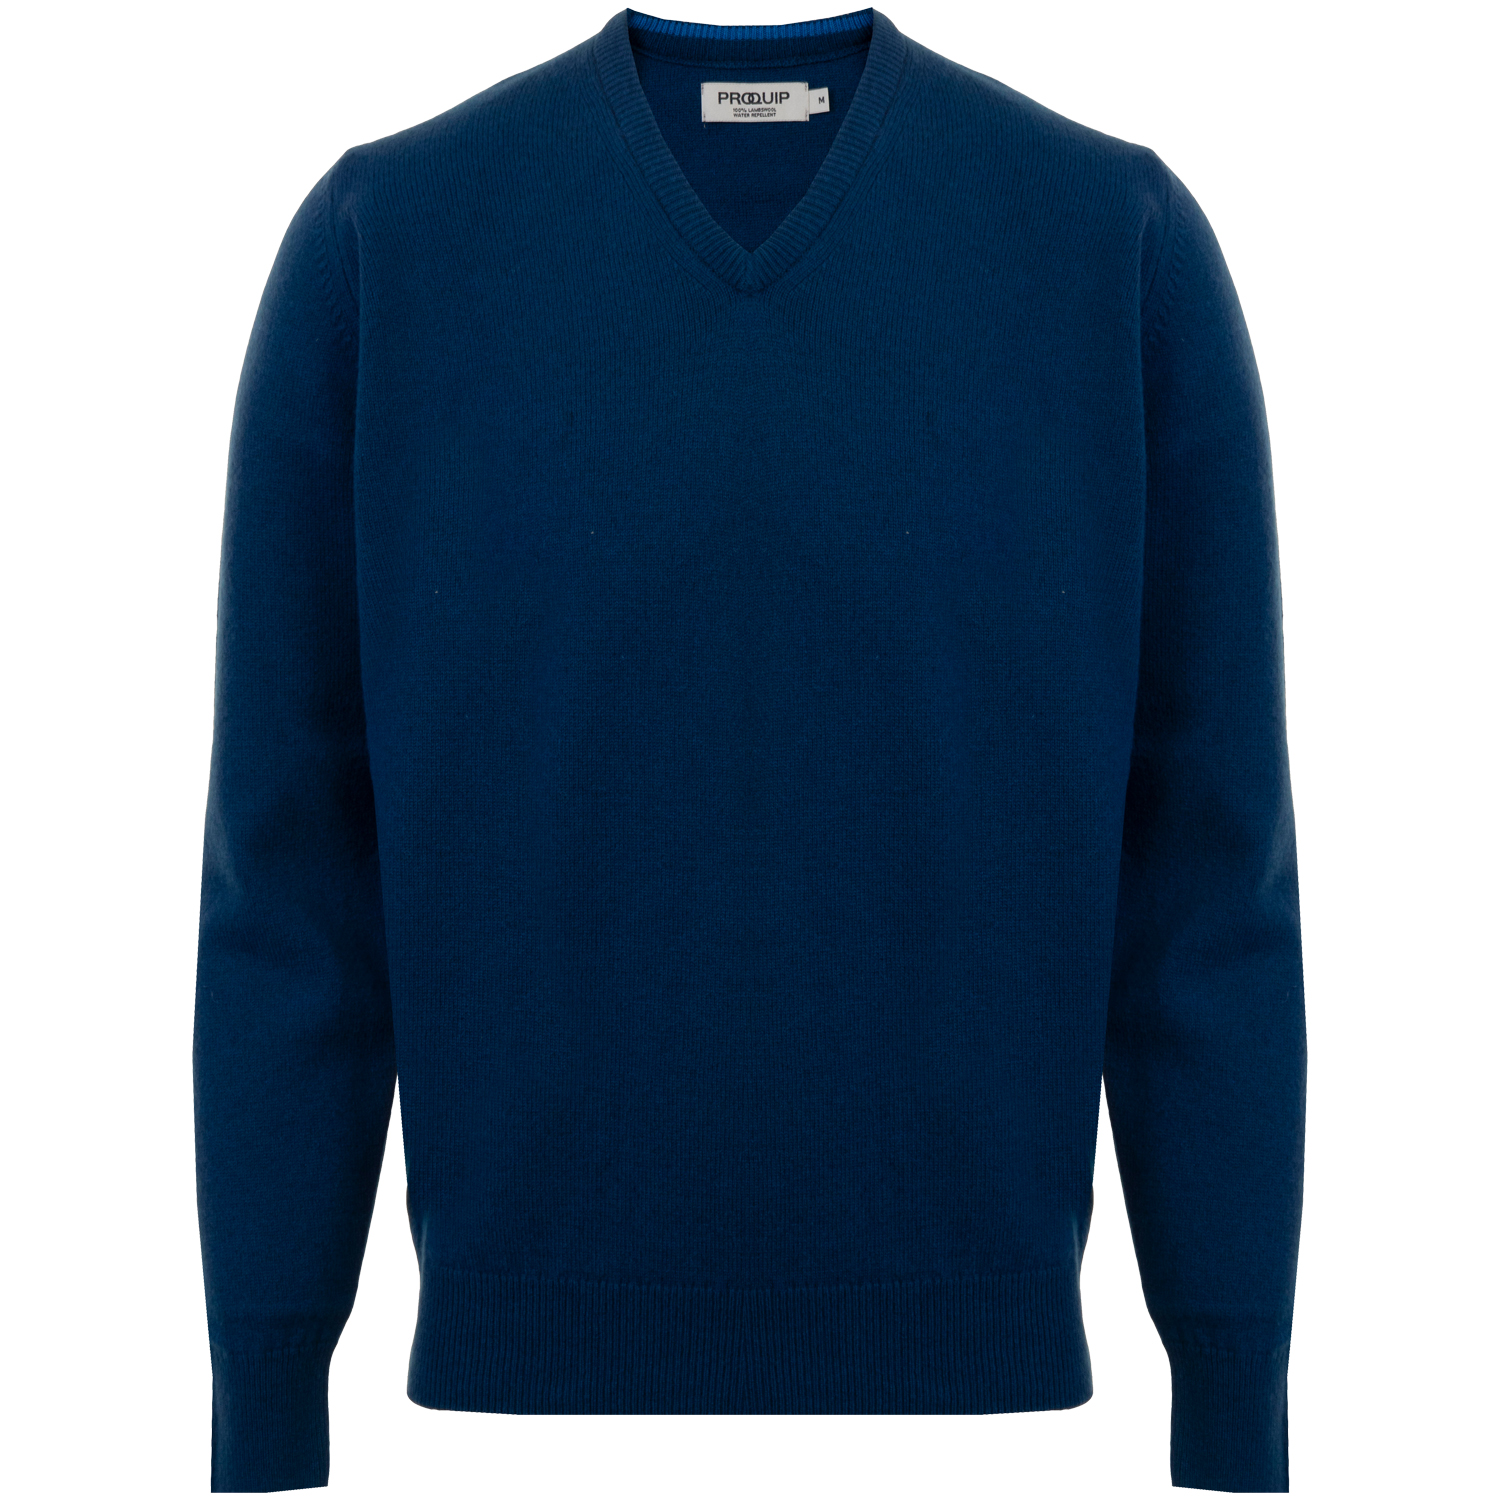 Proquip Mens Lambswool V-Neck Golf Sweater  - Military